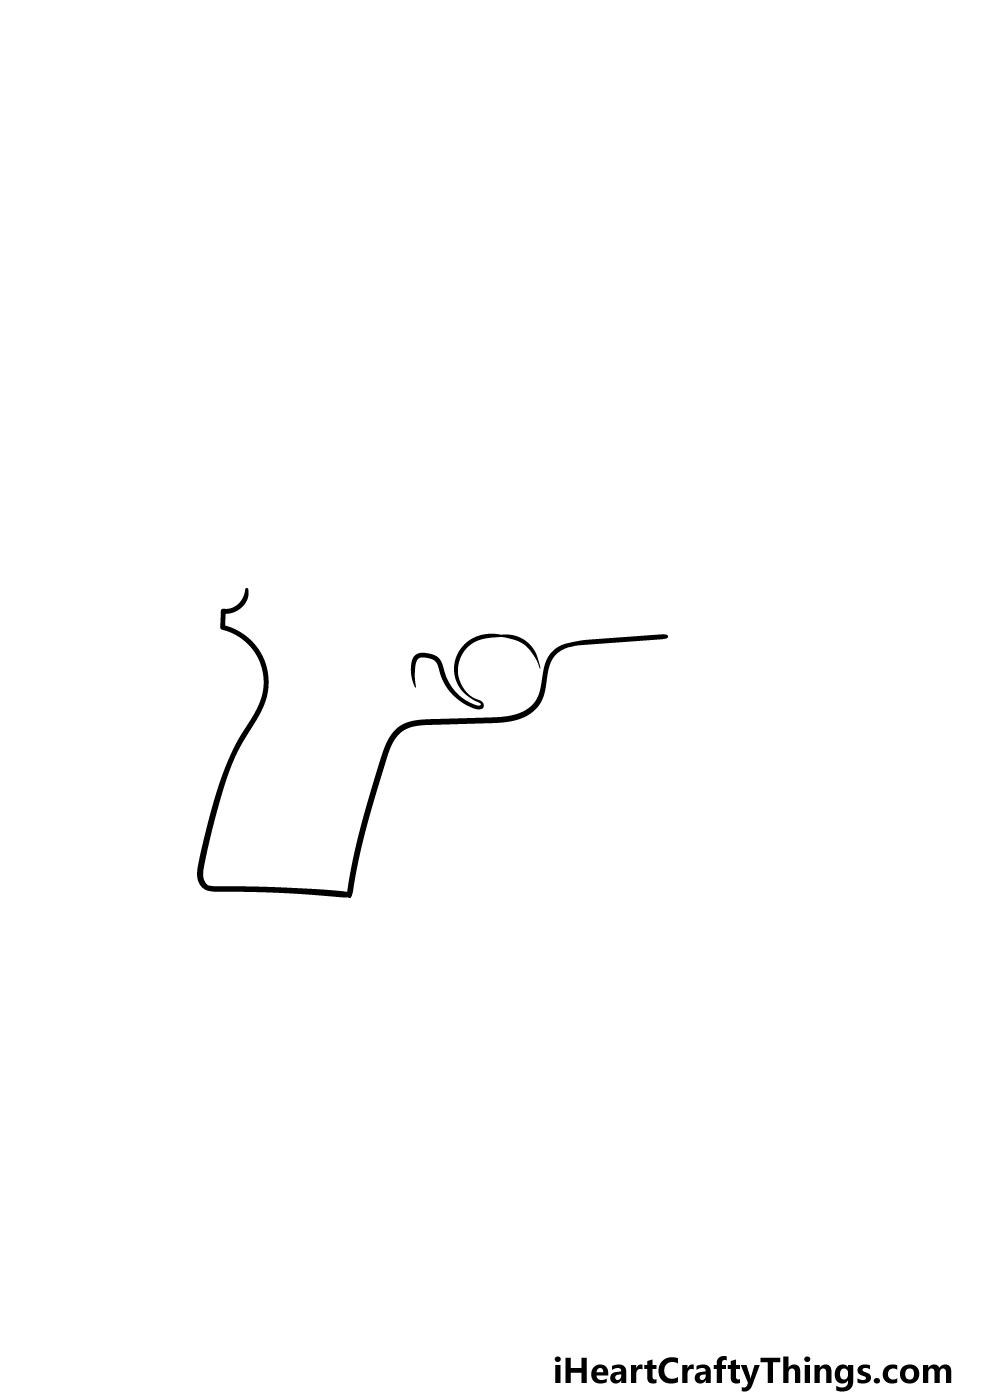 drawing a pistol step 1